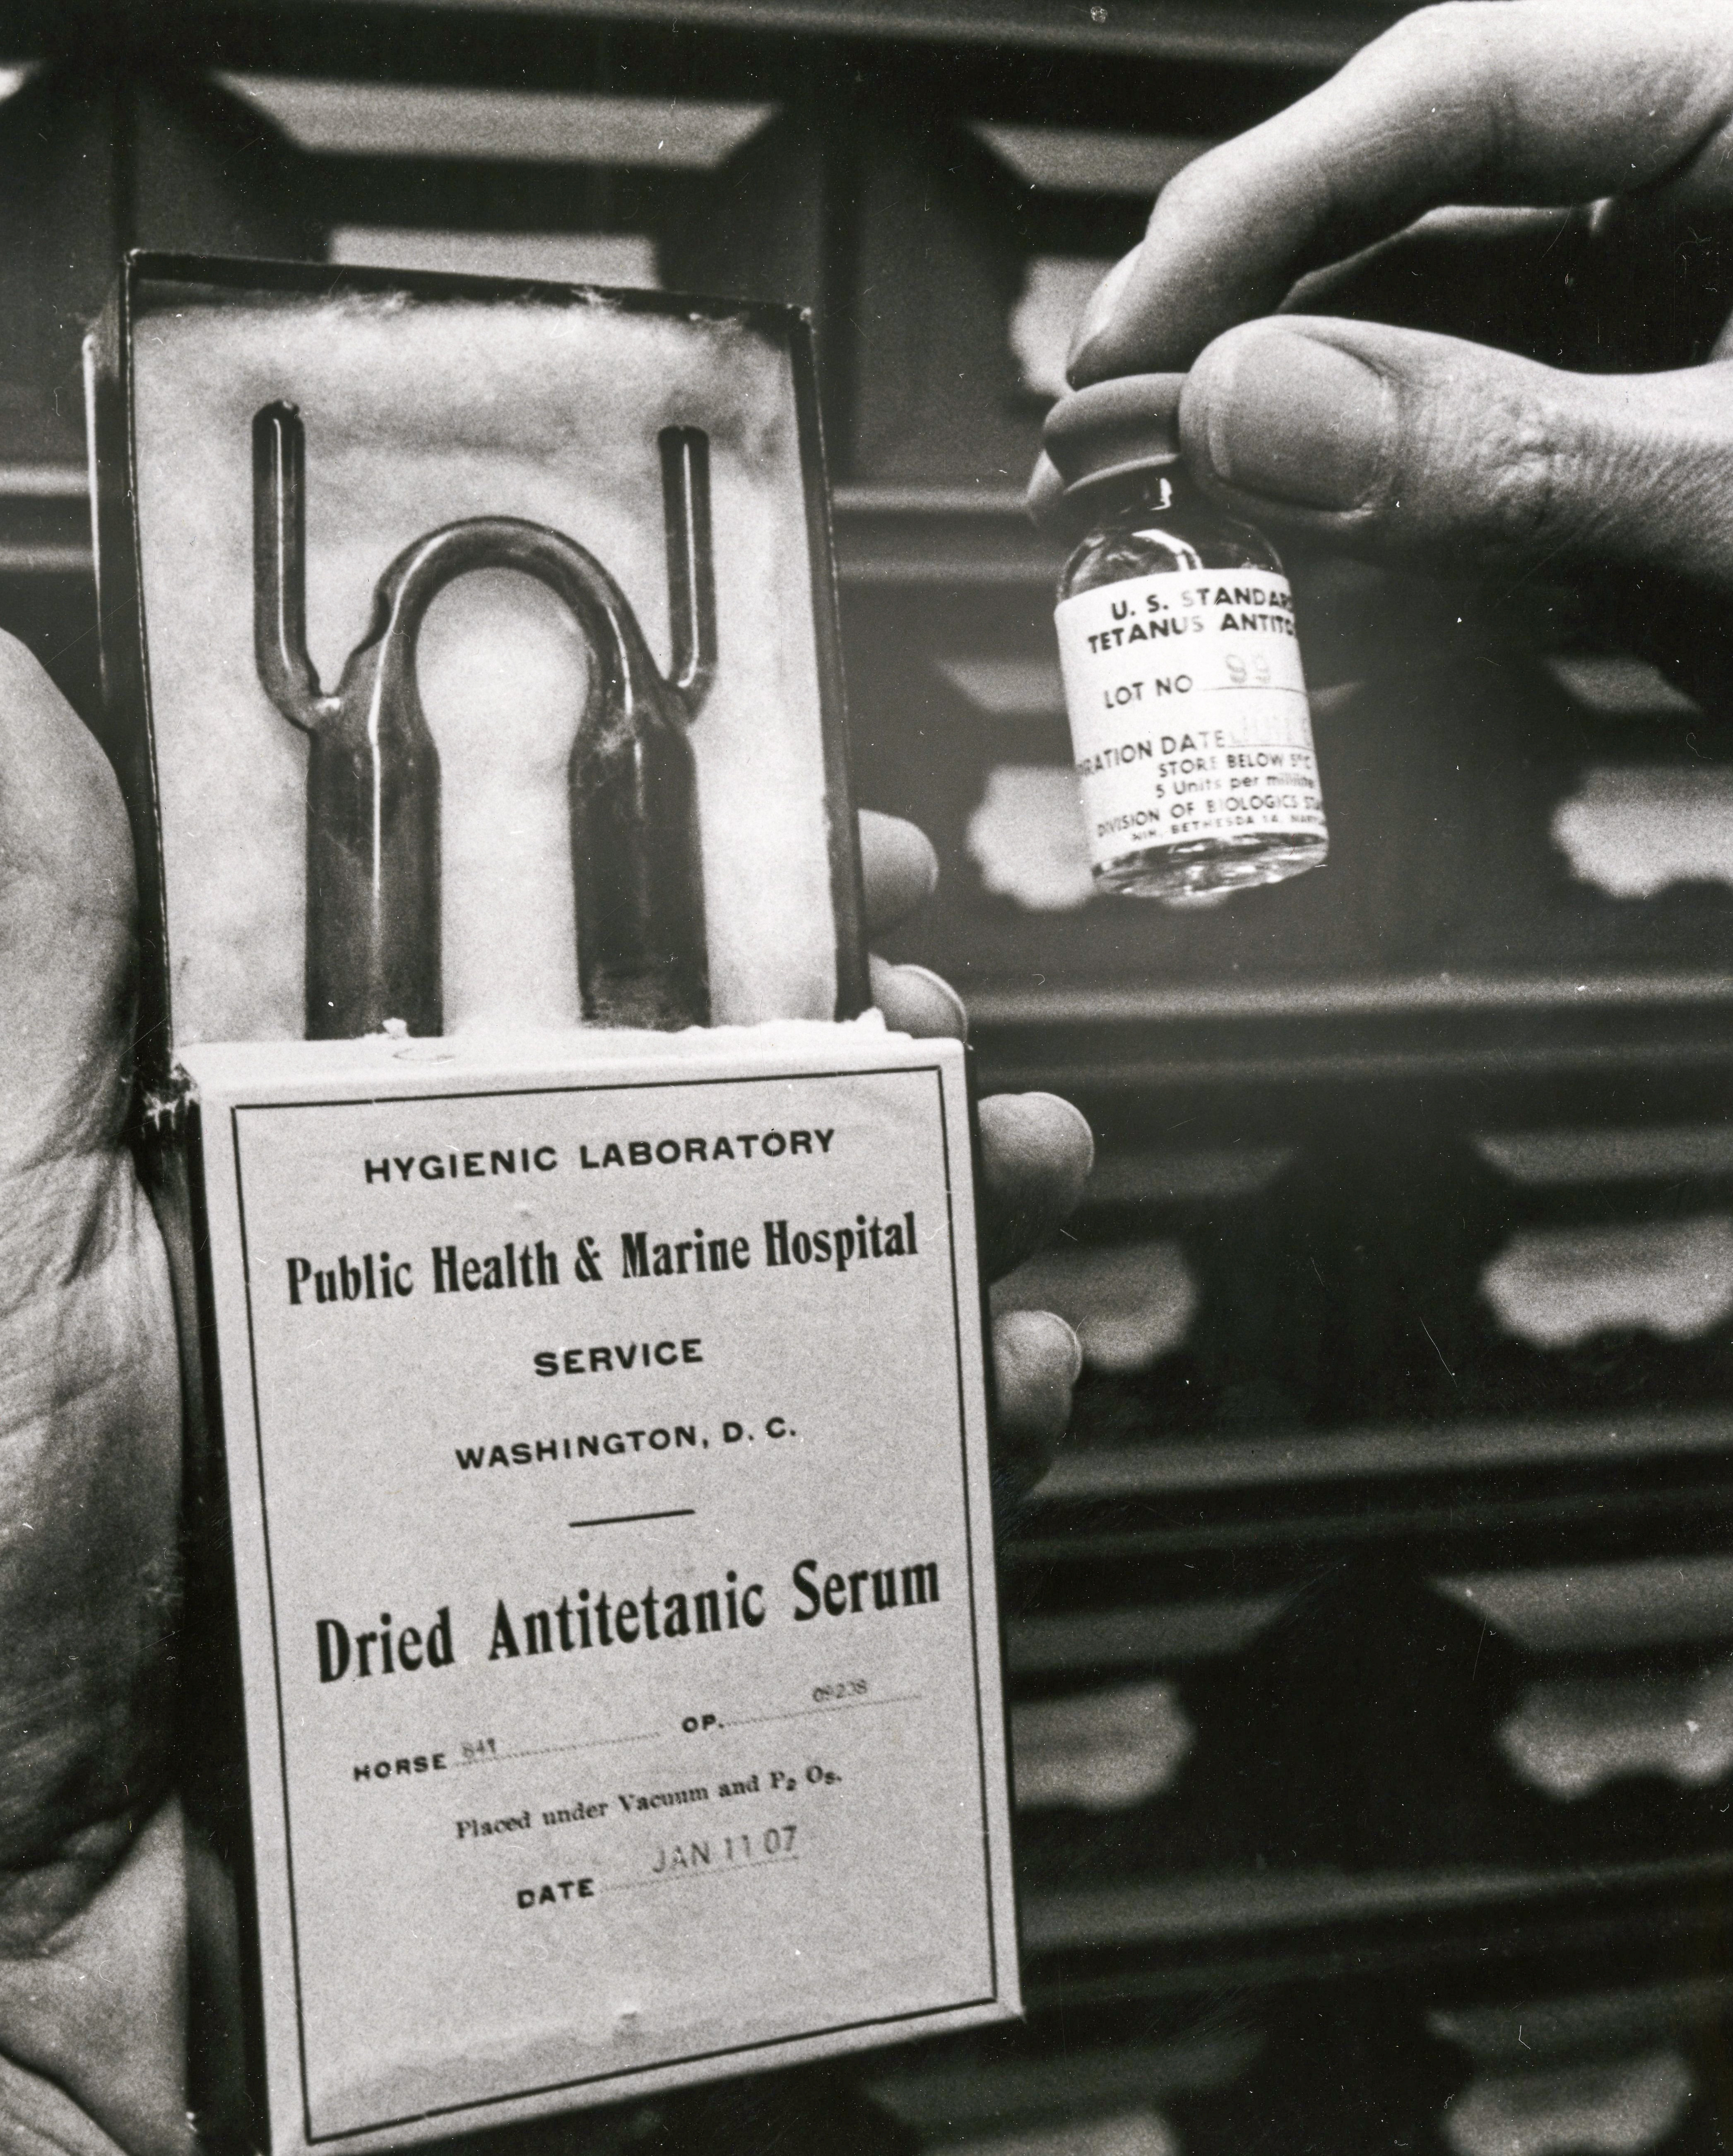 A vial of tetanus antitoxin and the dried antiserum are held up in someone's hands.